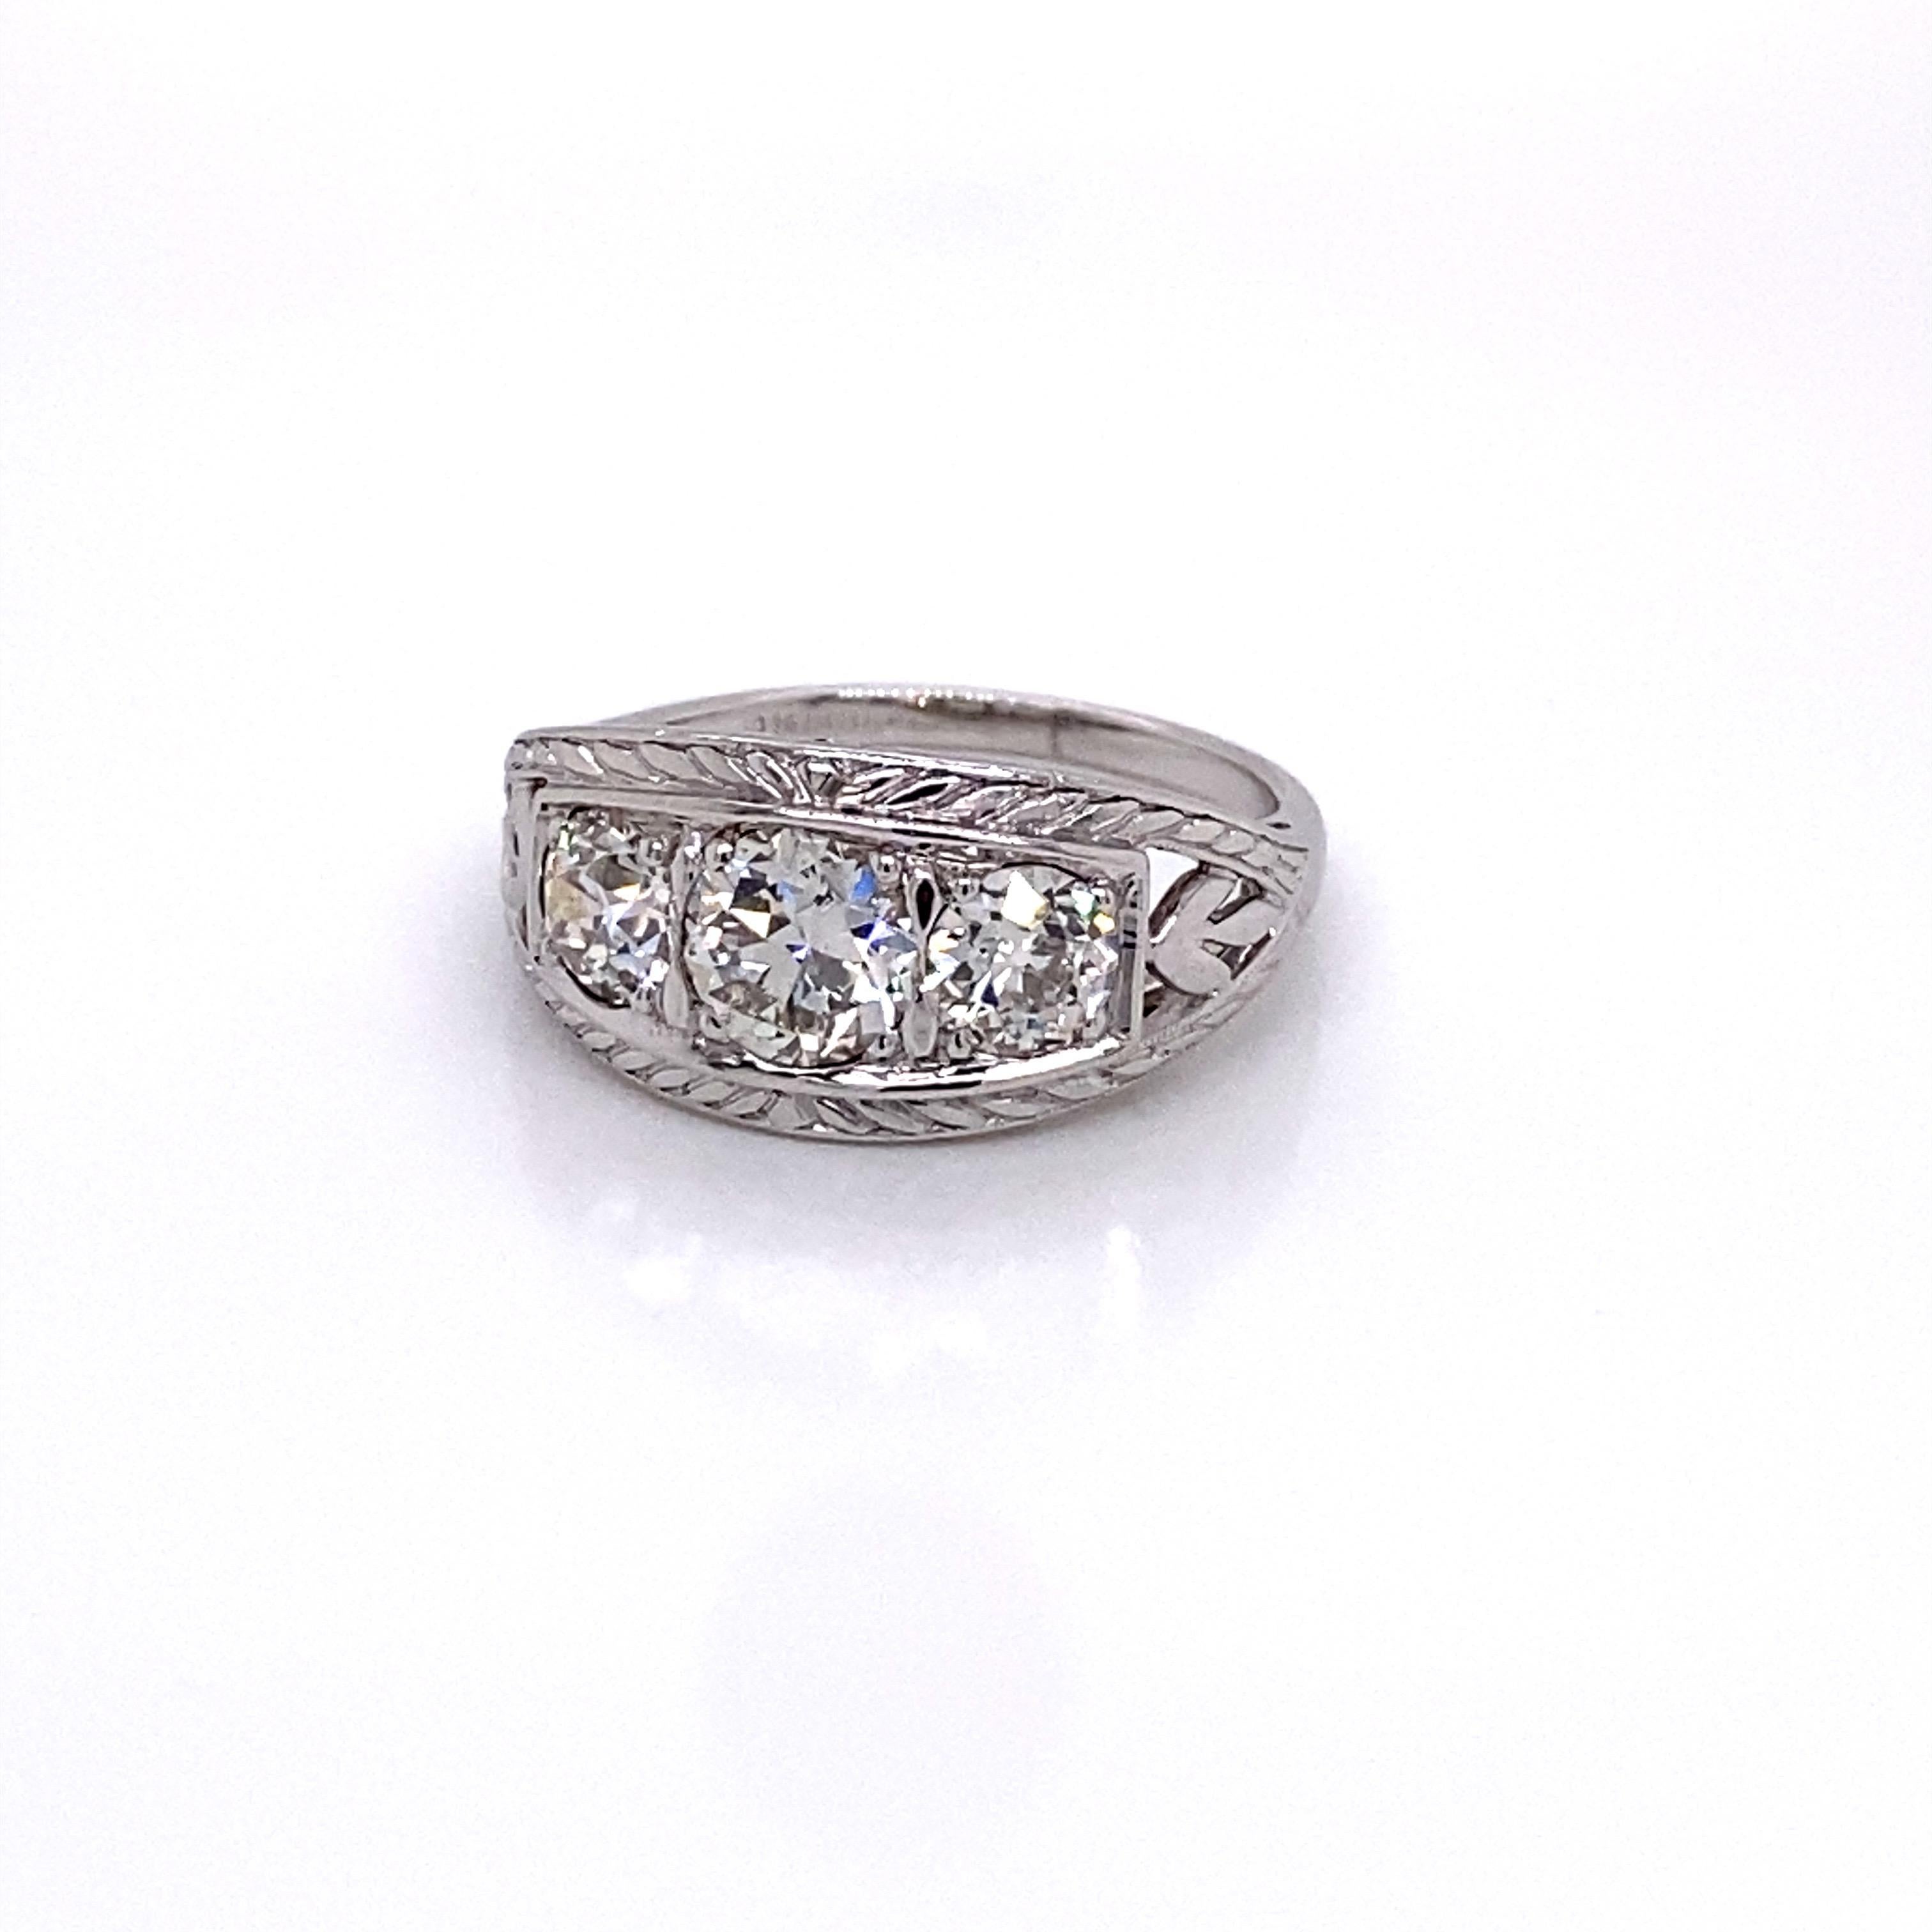 Vintage 1930s 3 Stone European Cut Diamond Platinum Ring 1.75ct - The center diamond weighs approximately .80ct and the 2 side diamonds weigh approximately .95ct. The diamonds are H-I color and SI2 clarity. They are set low in a wide tapered setting